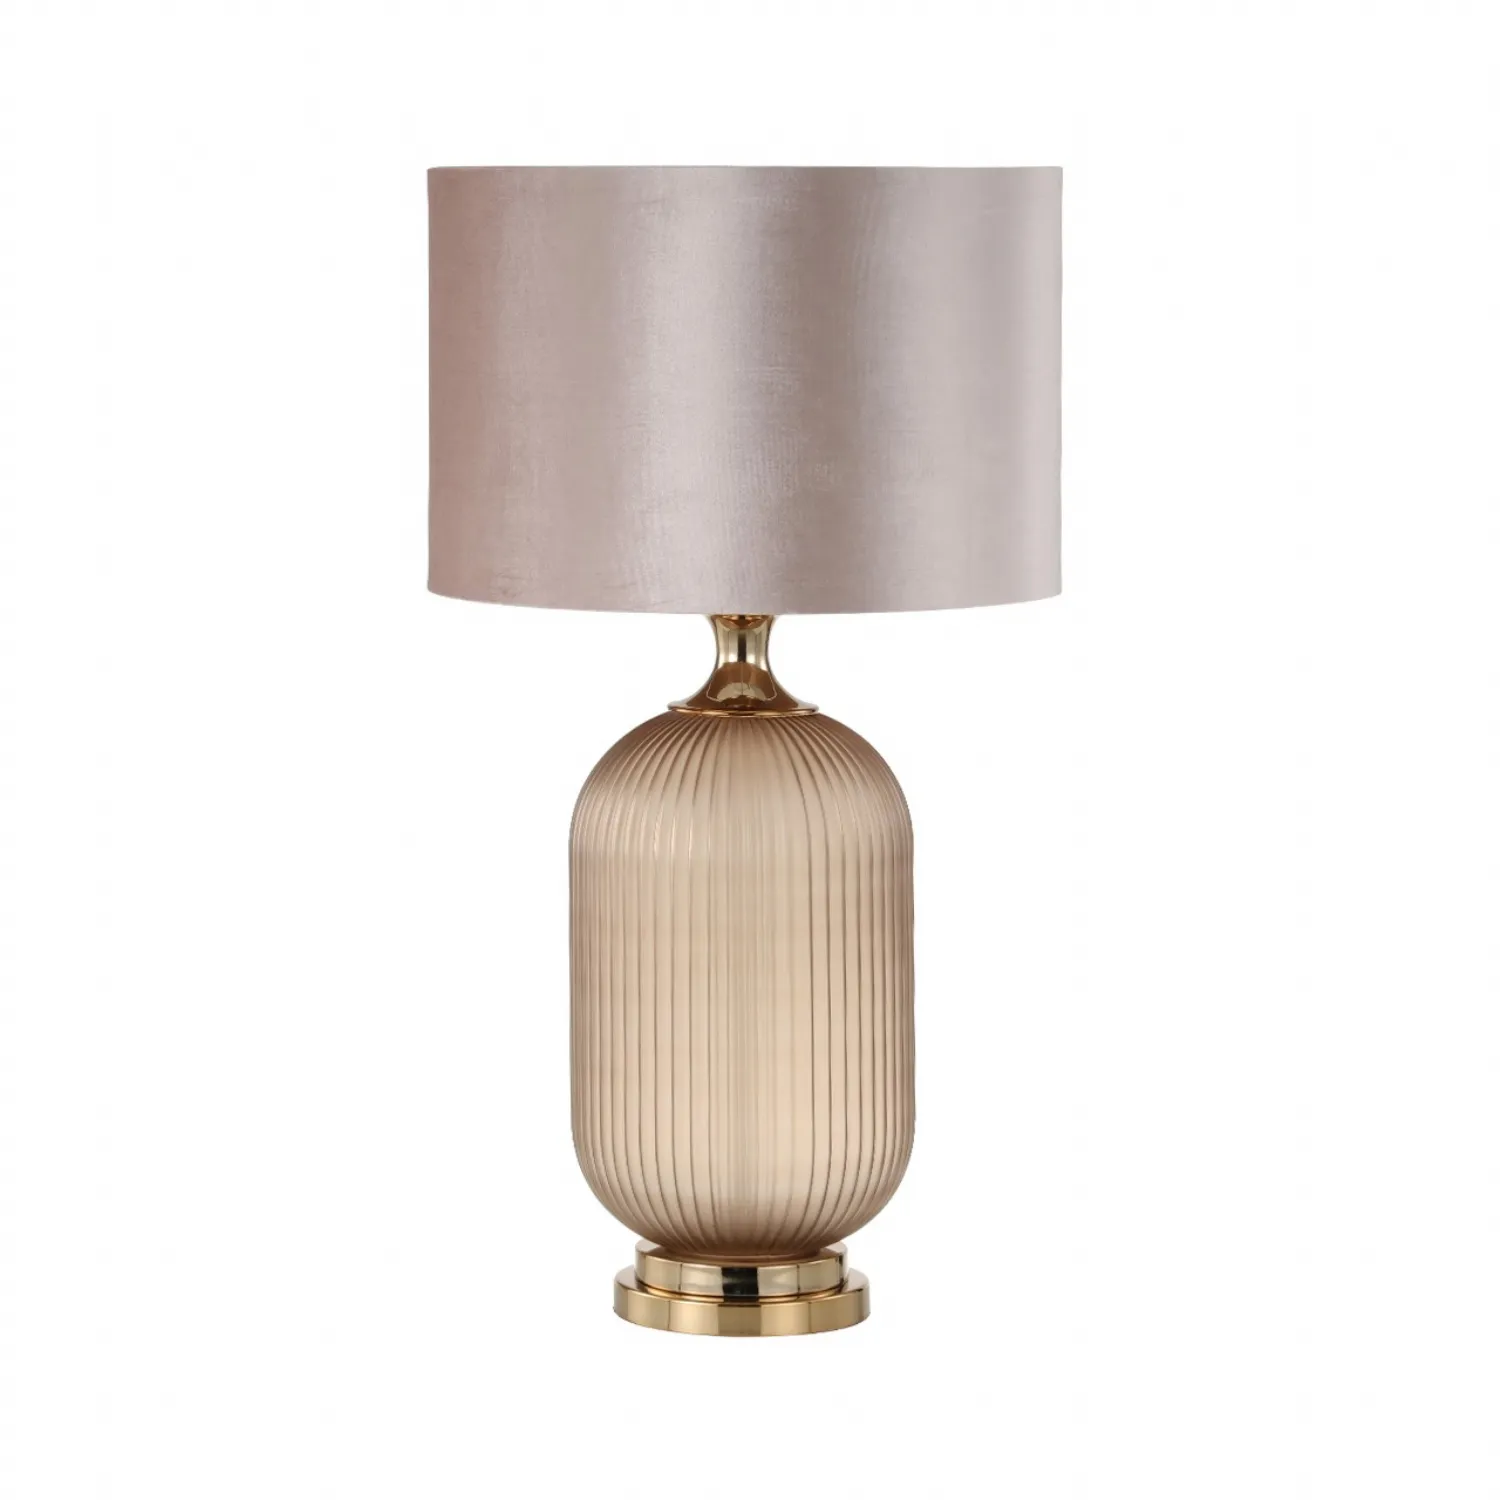 77. 5cm Brown Pleated Glass Table Lamp With Champagne Velvet Shade